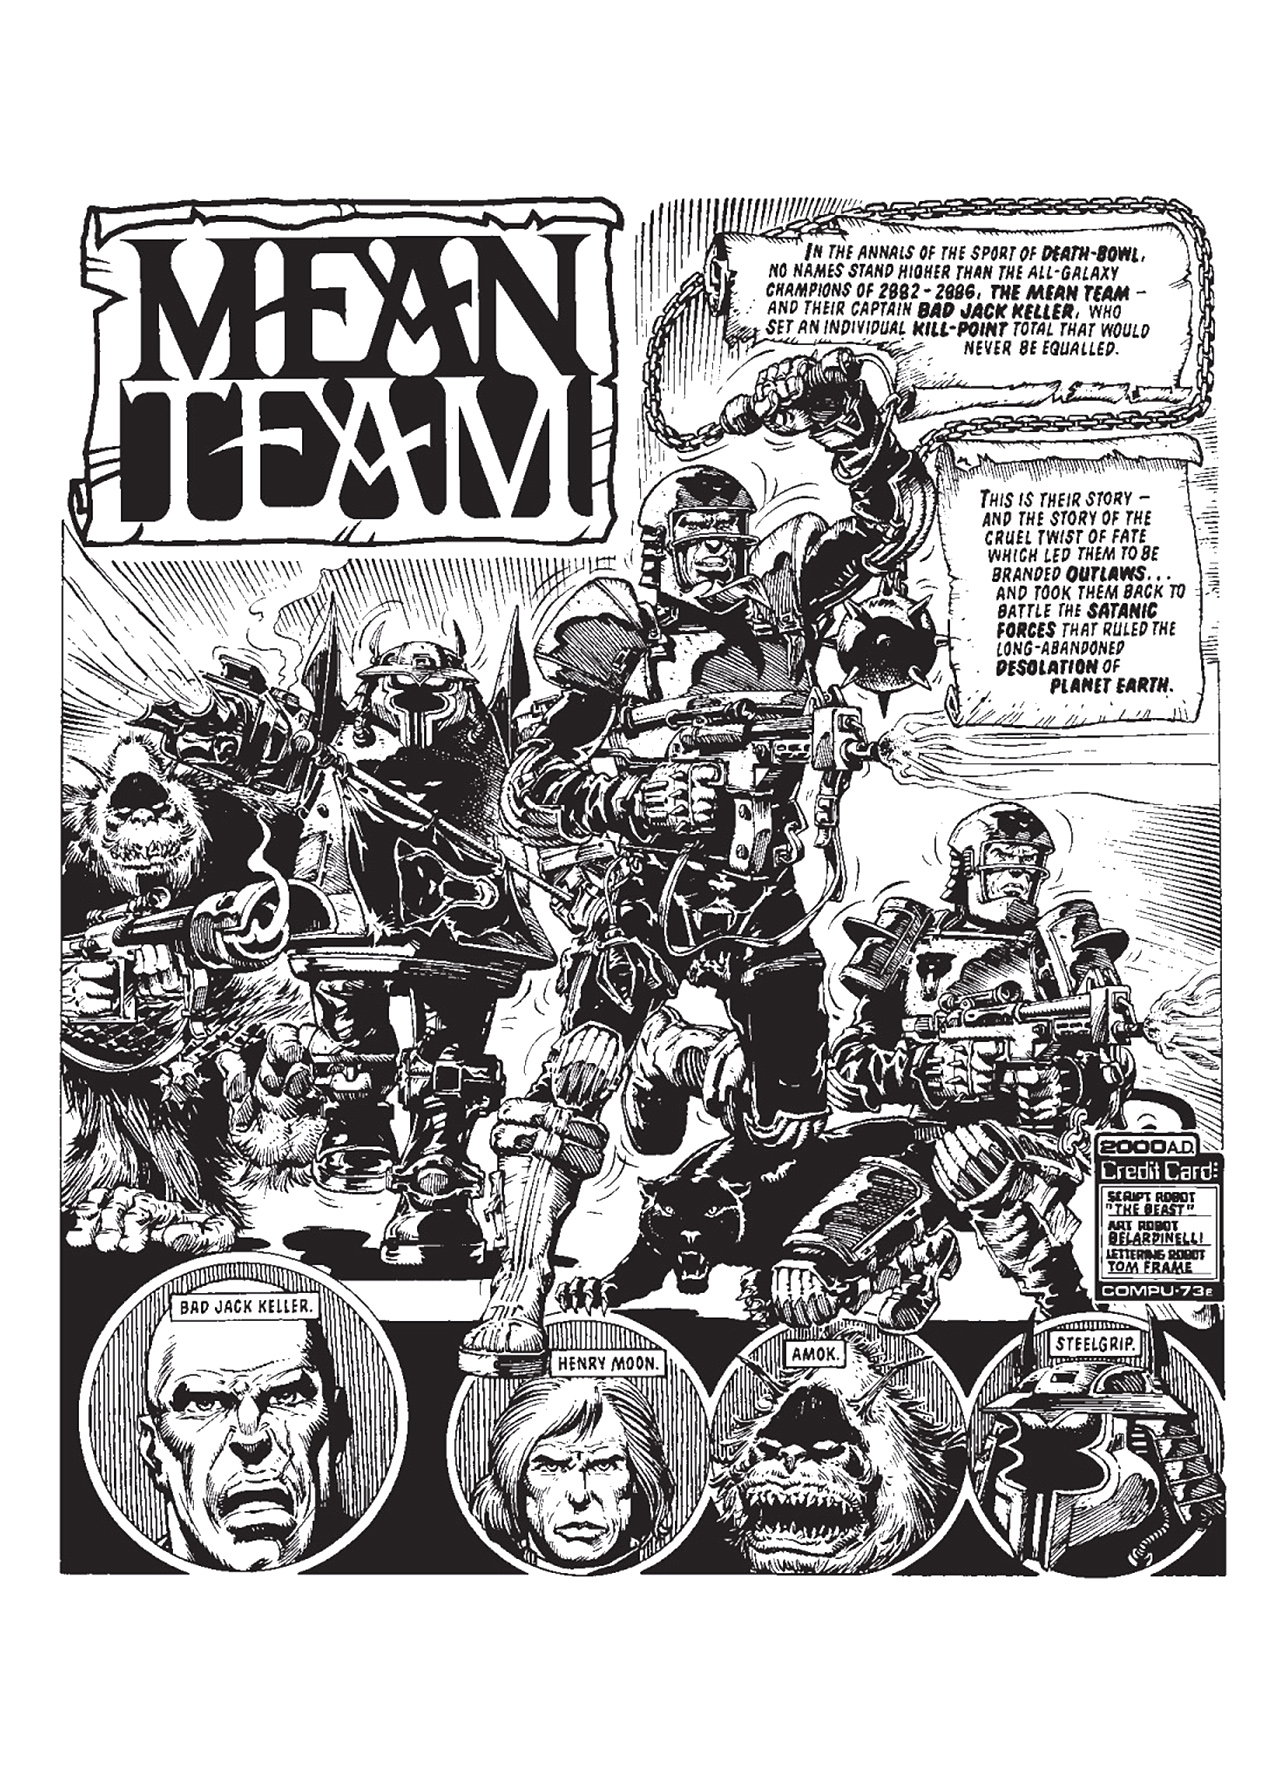 Read online Mean Team comic -  Issue # TPB - 5